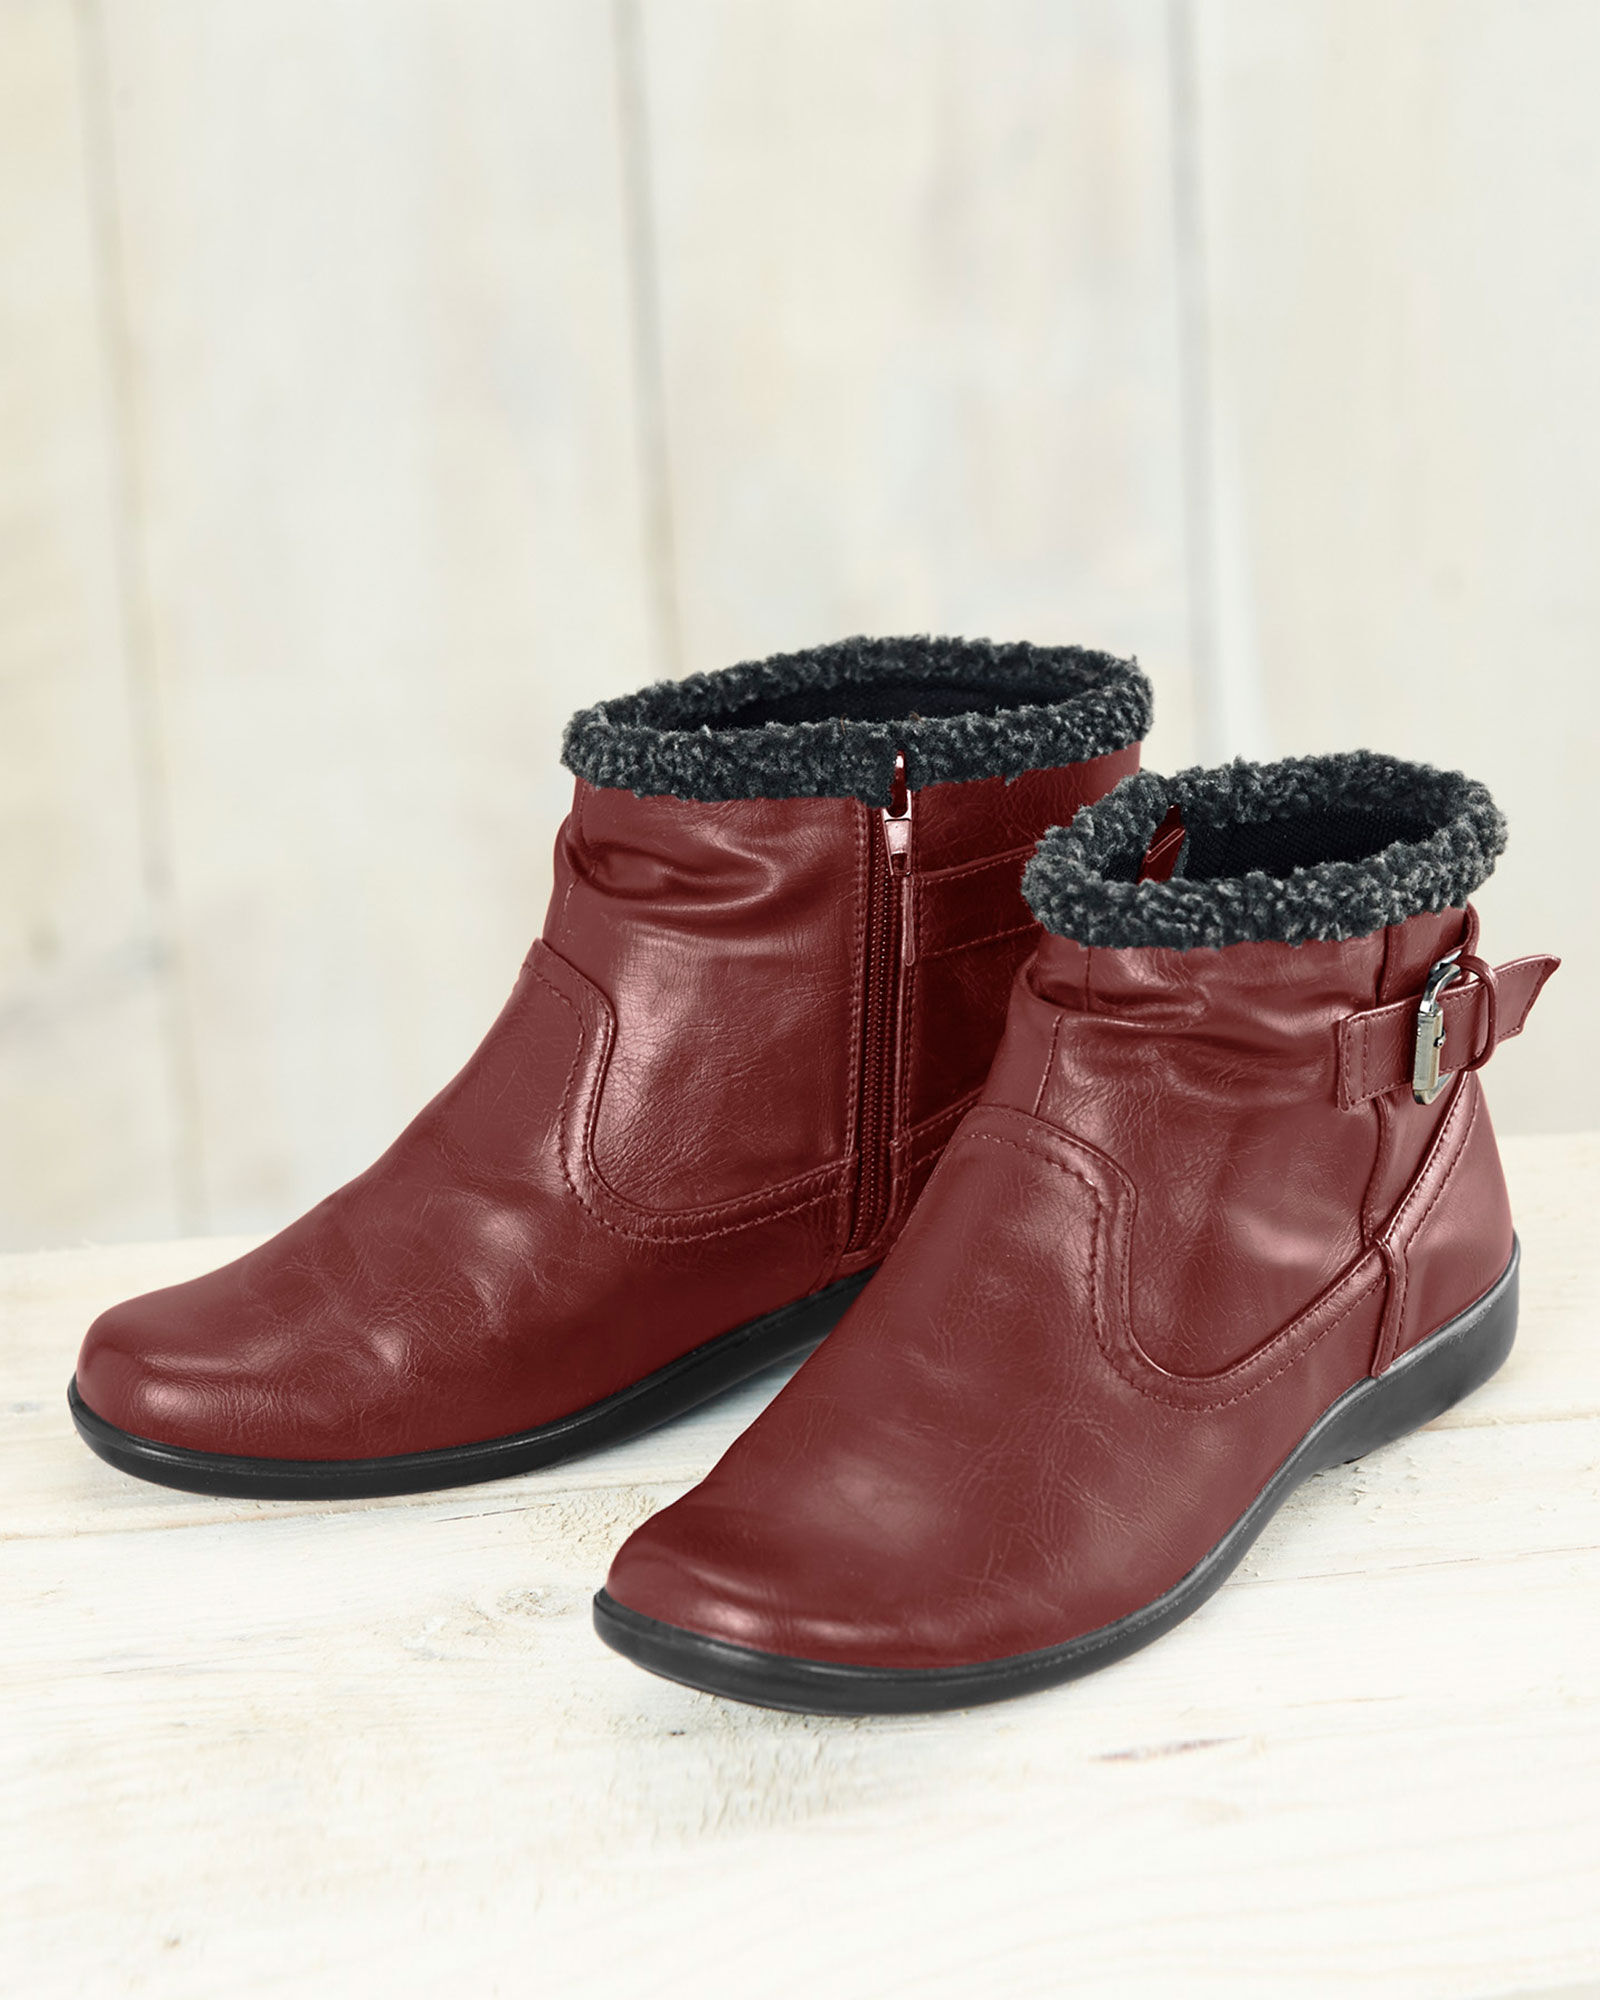 cotton traders sale boots